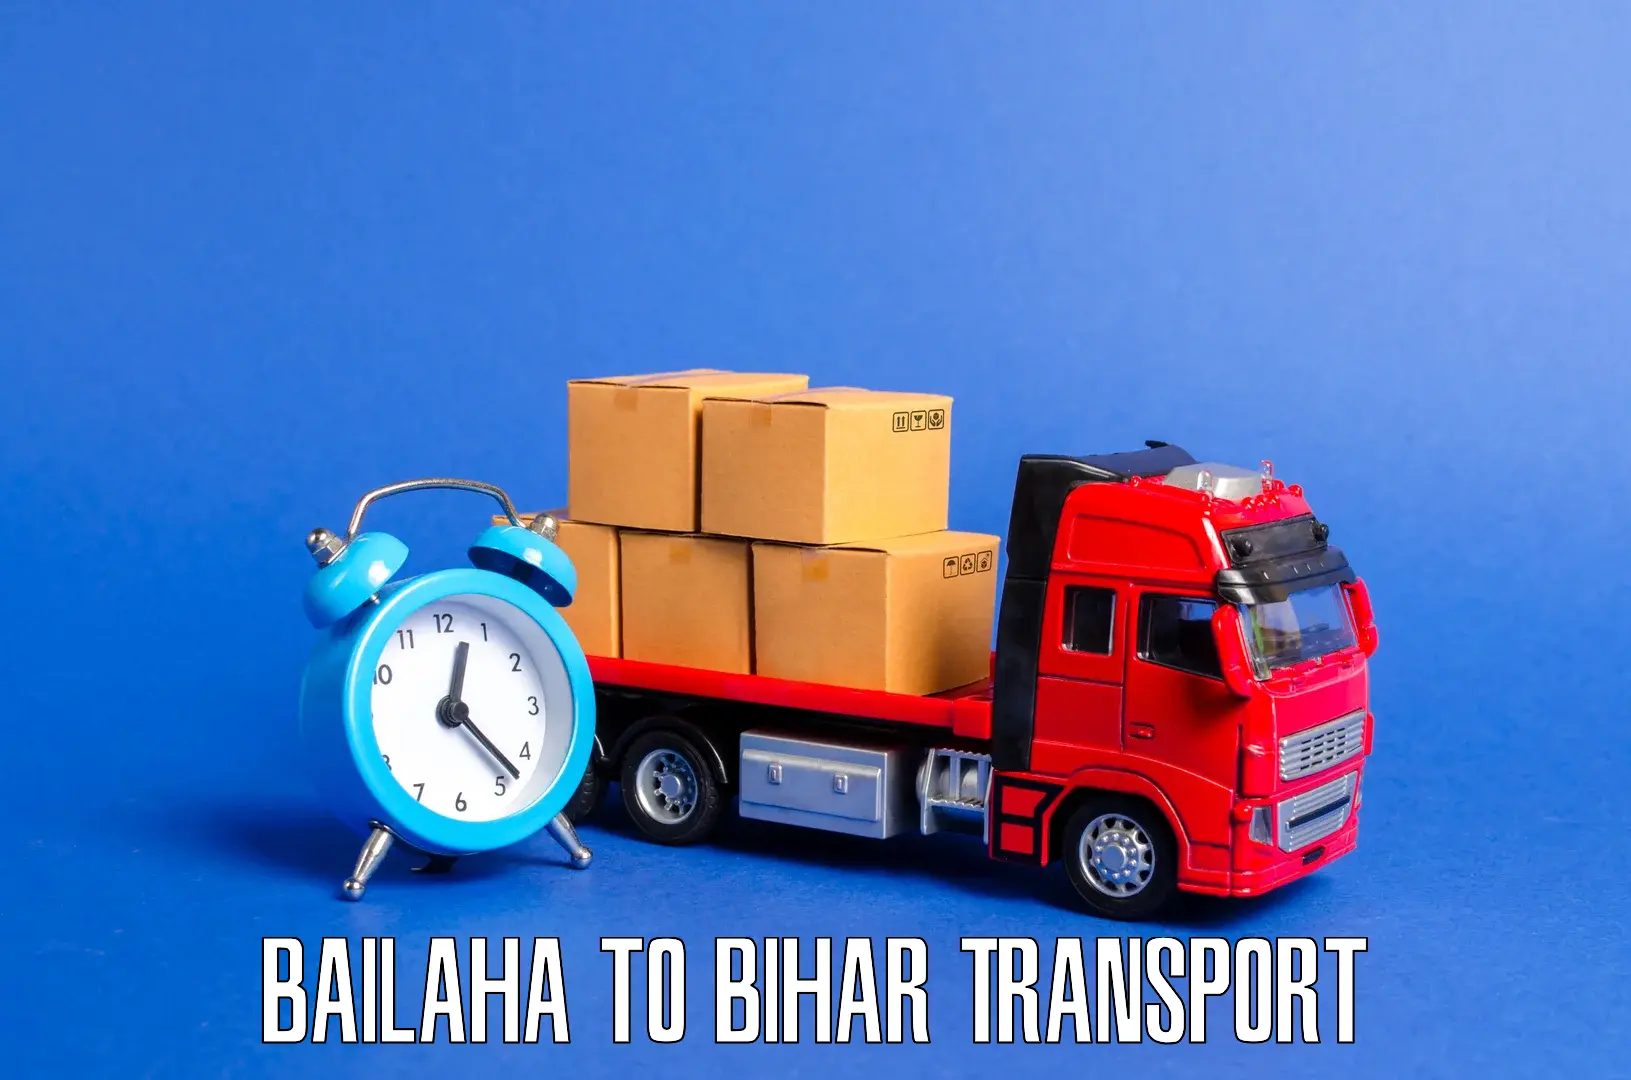 Transport shared services in Bailaha to Korha